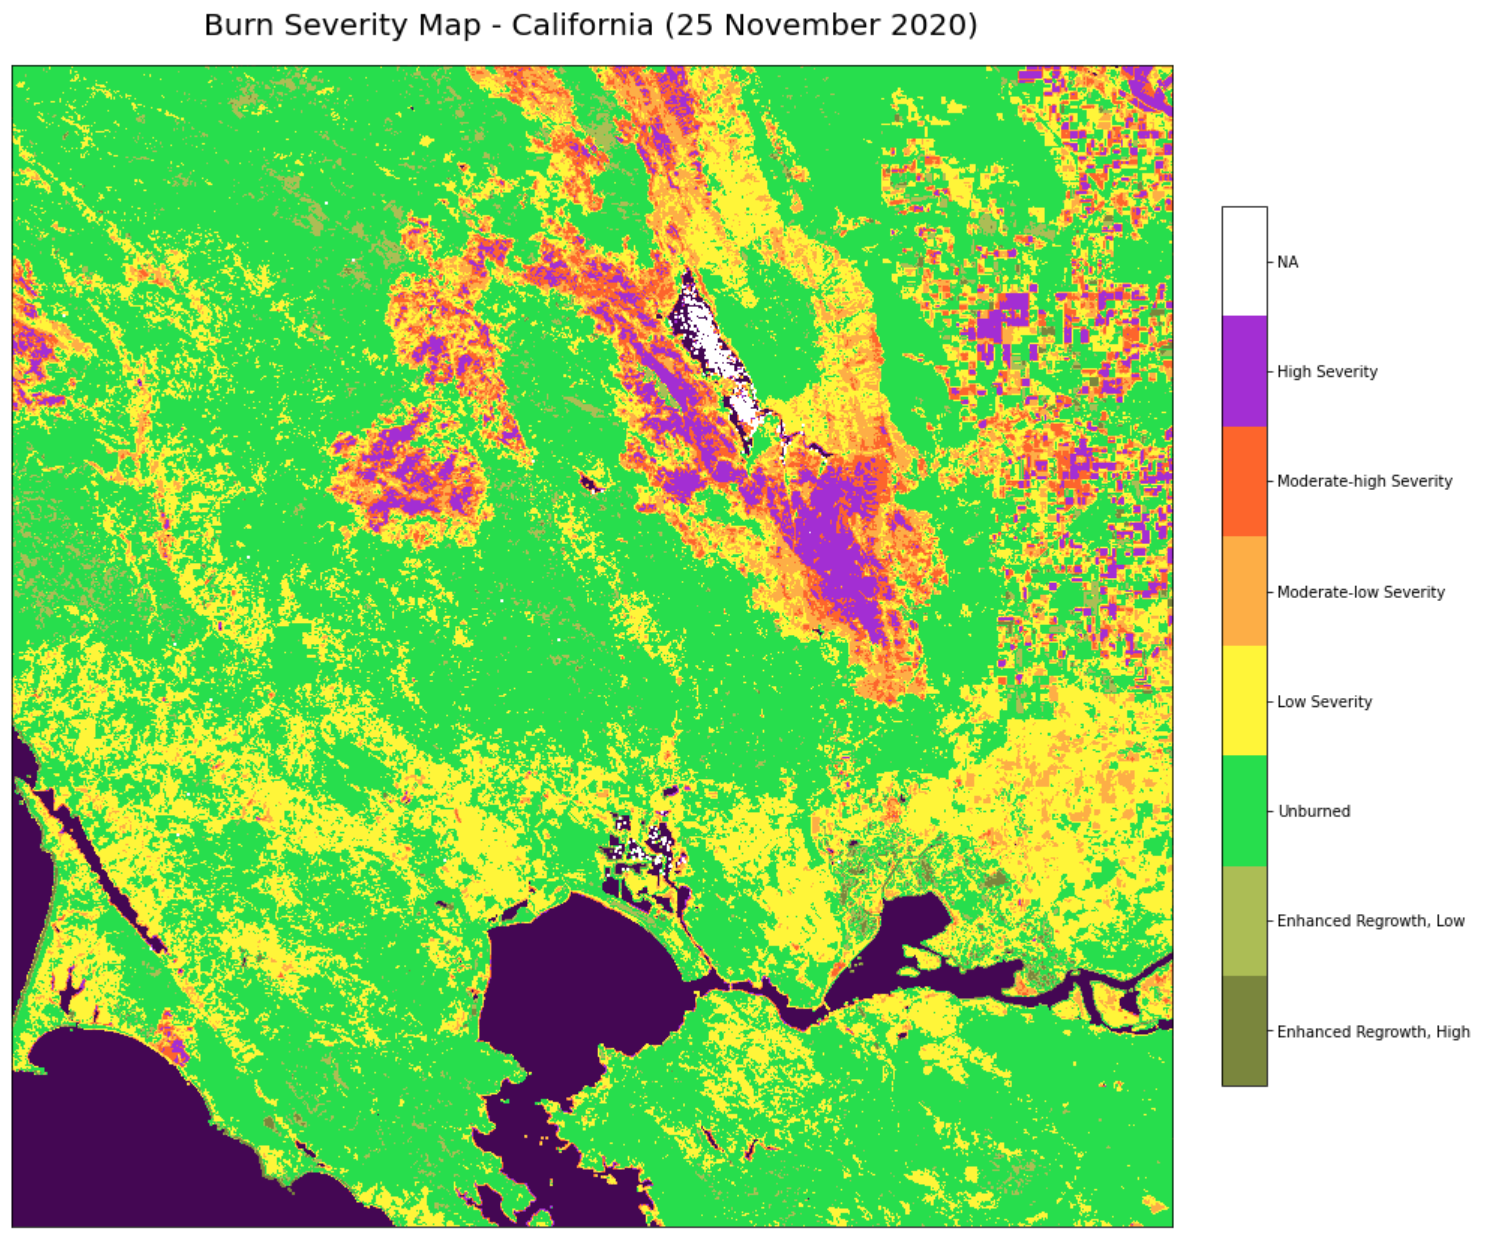 Figure 8. Burn severity is classified using the dNBR image shown in Figure 7. The coastal water bodies are masked using the water mask from the Sentinel-2 data’s scene classification layer.